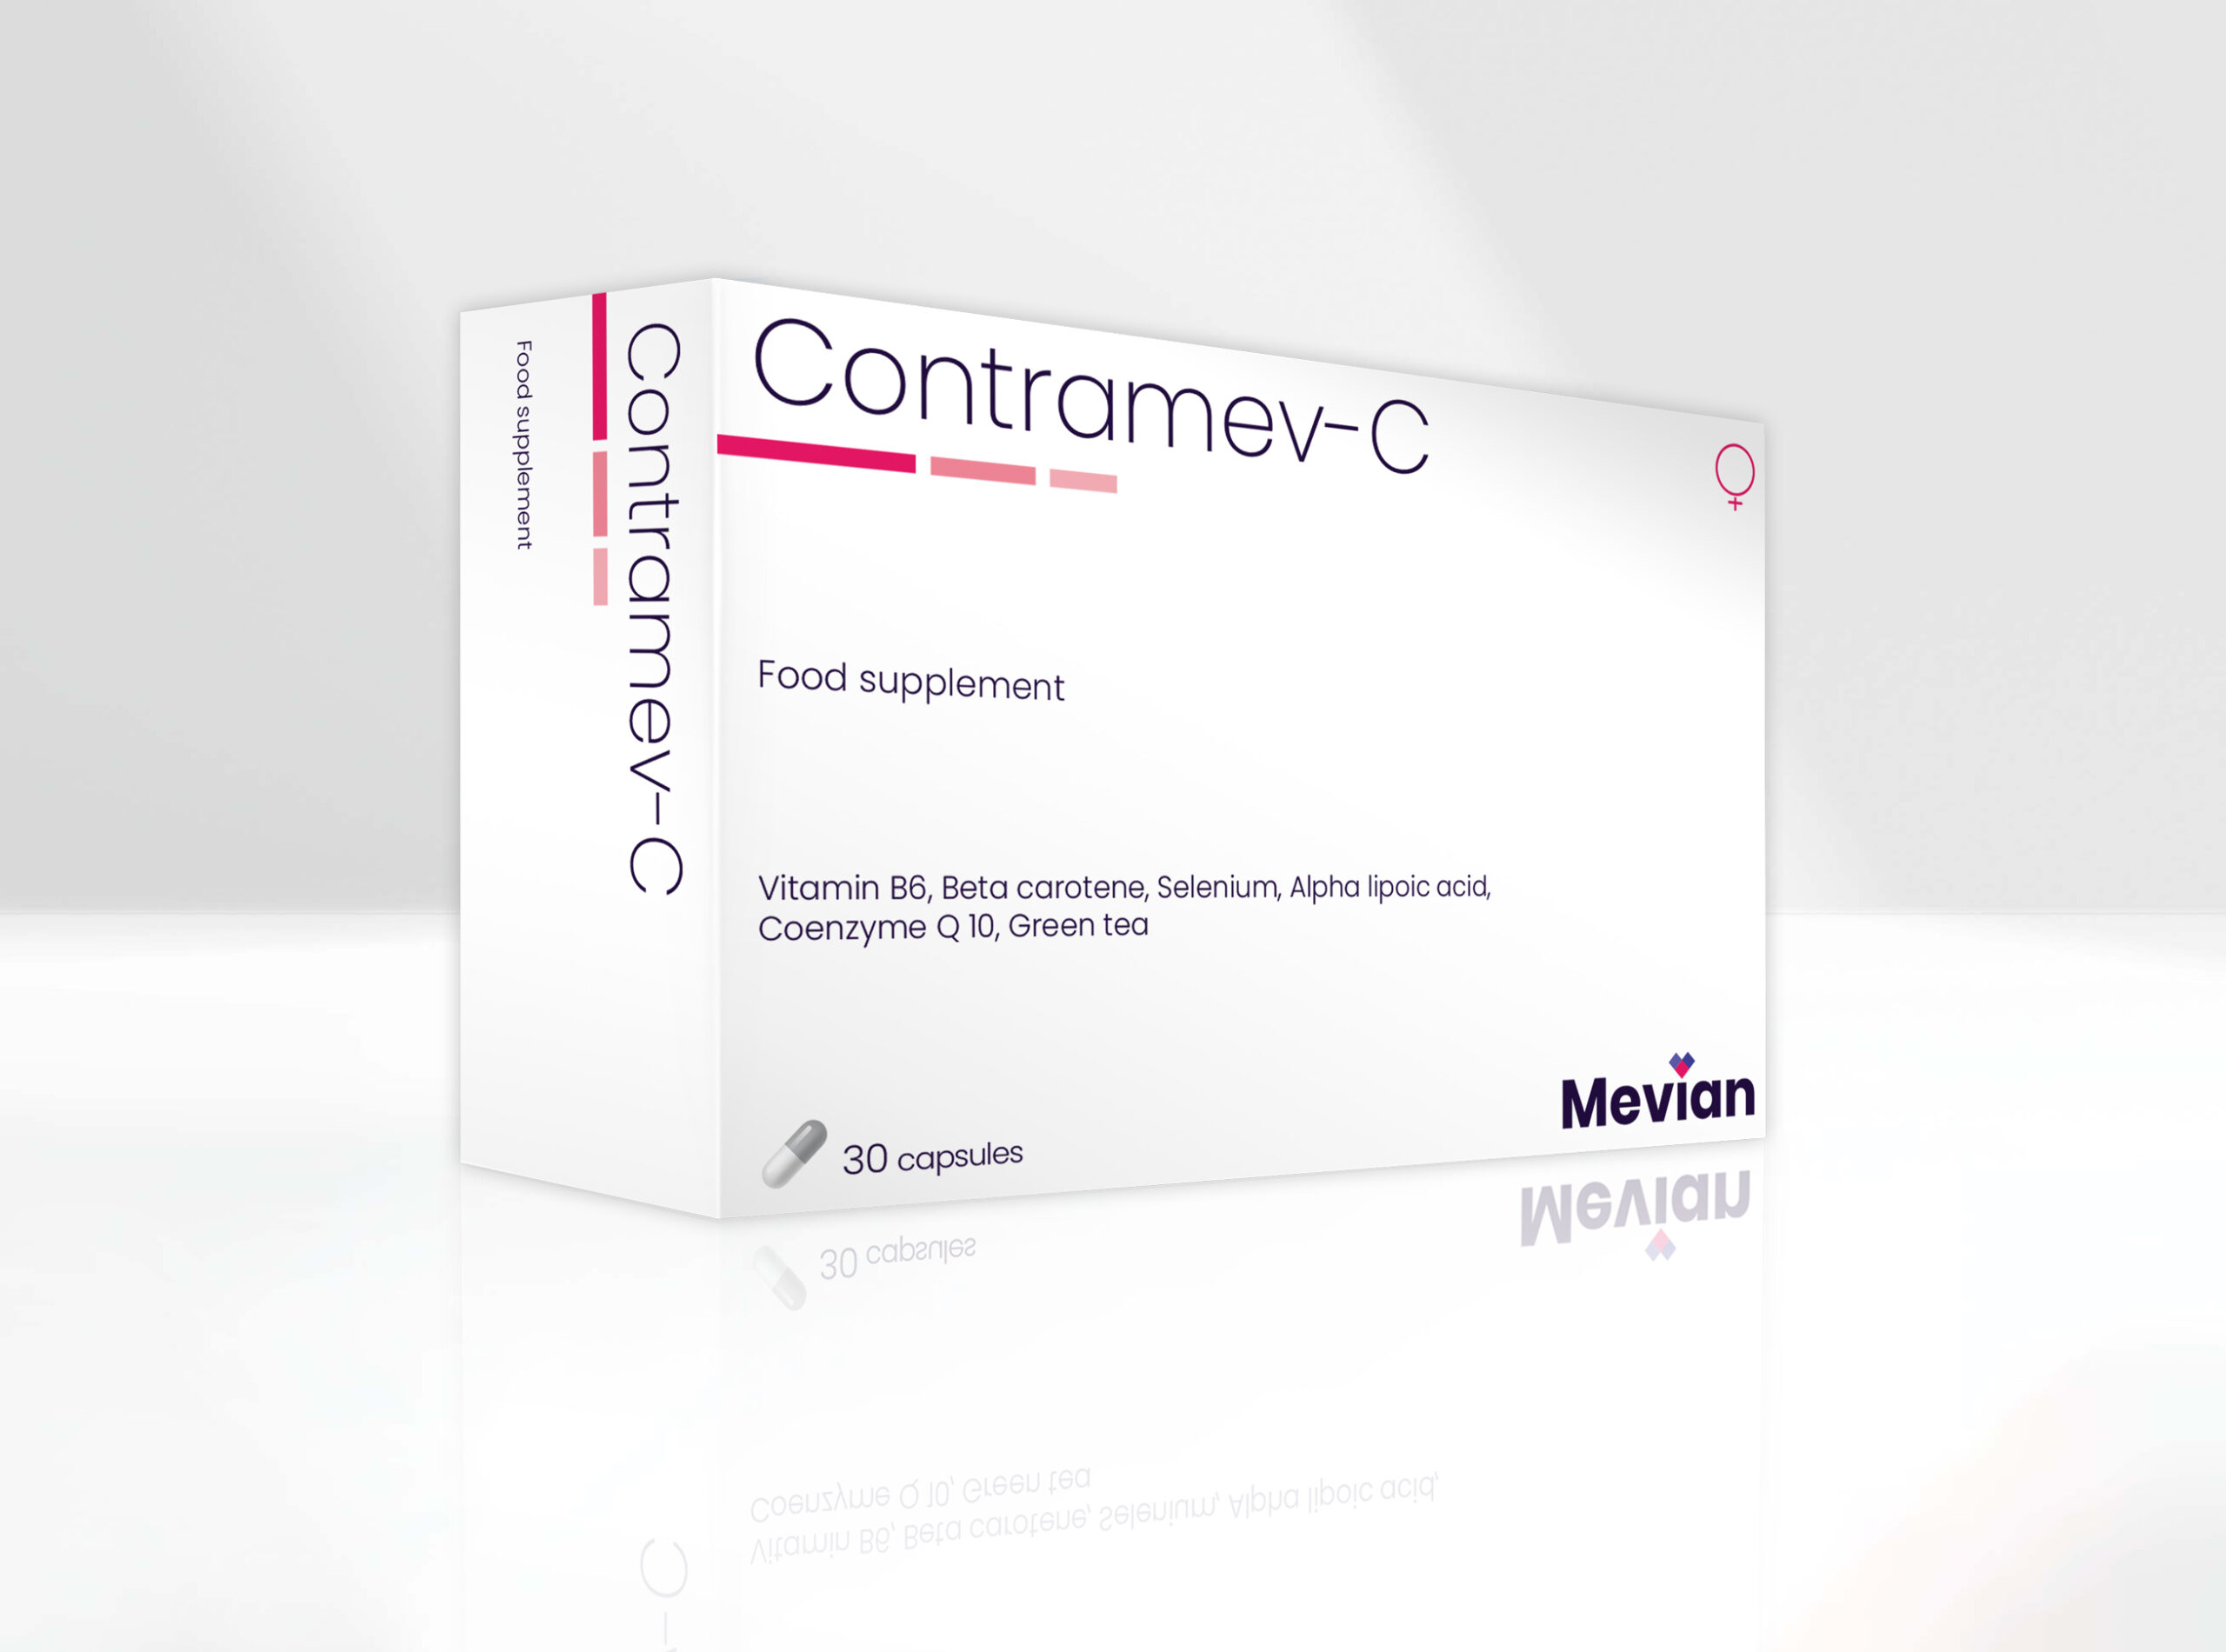 Contramev-C is specially formulated to combat the side effects caused by prolonged use of the daily contraceptive pill in women.